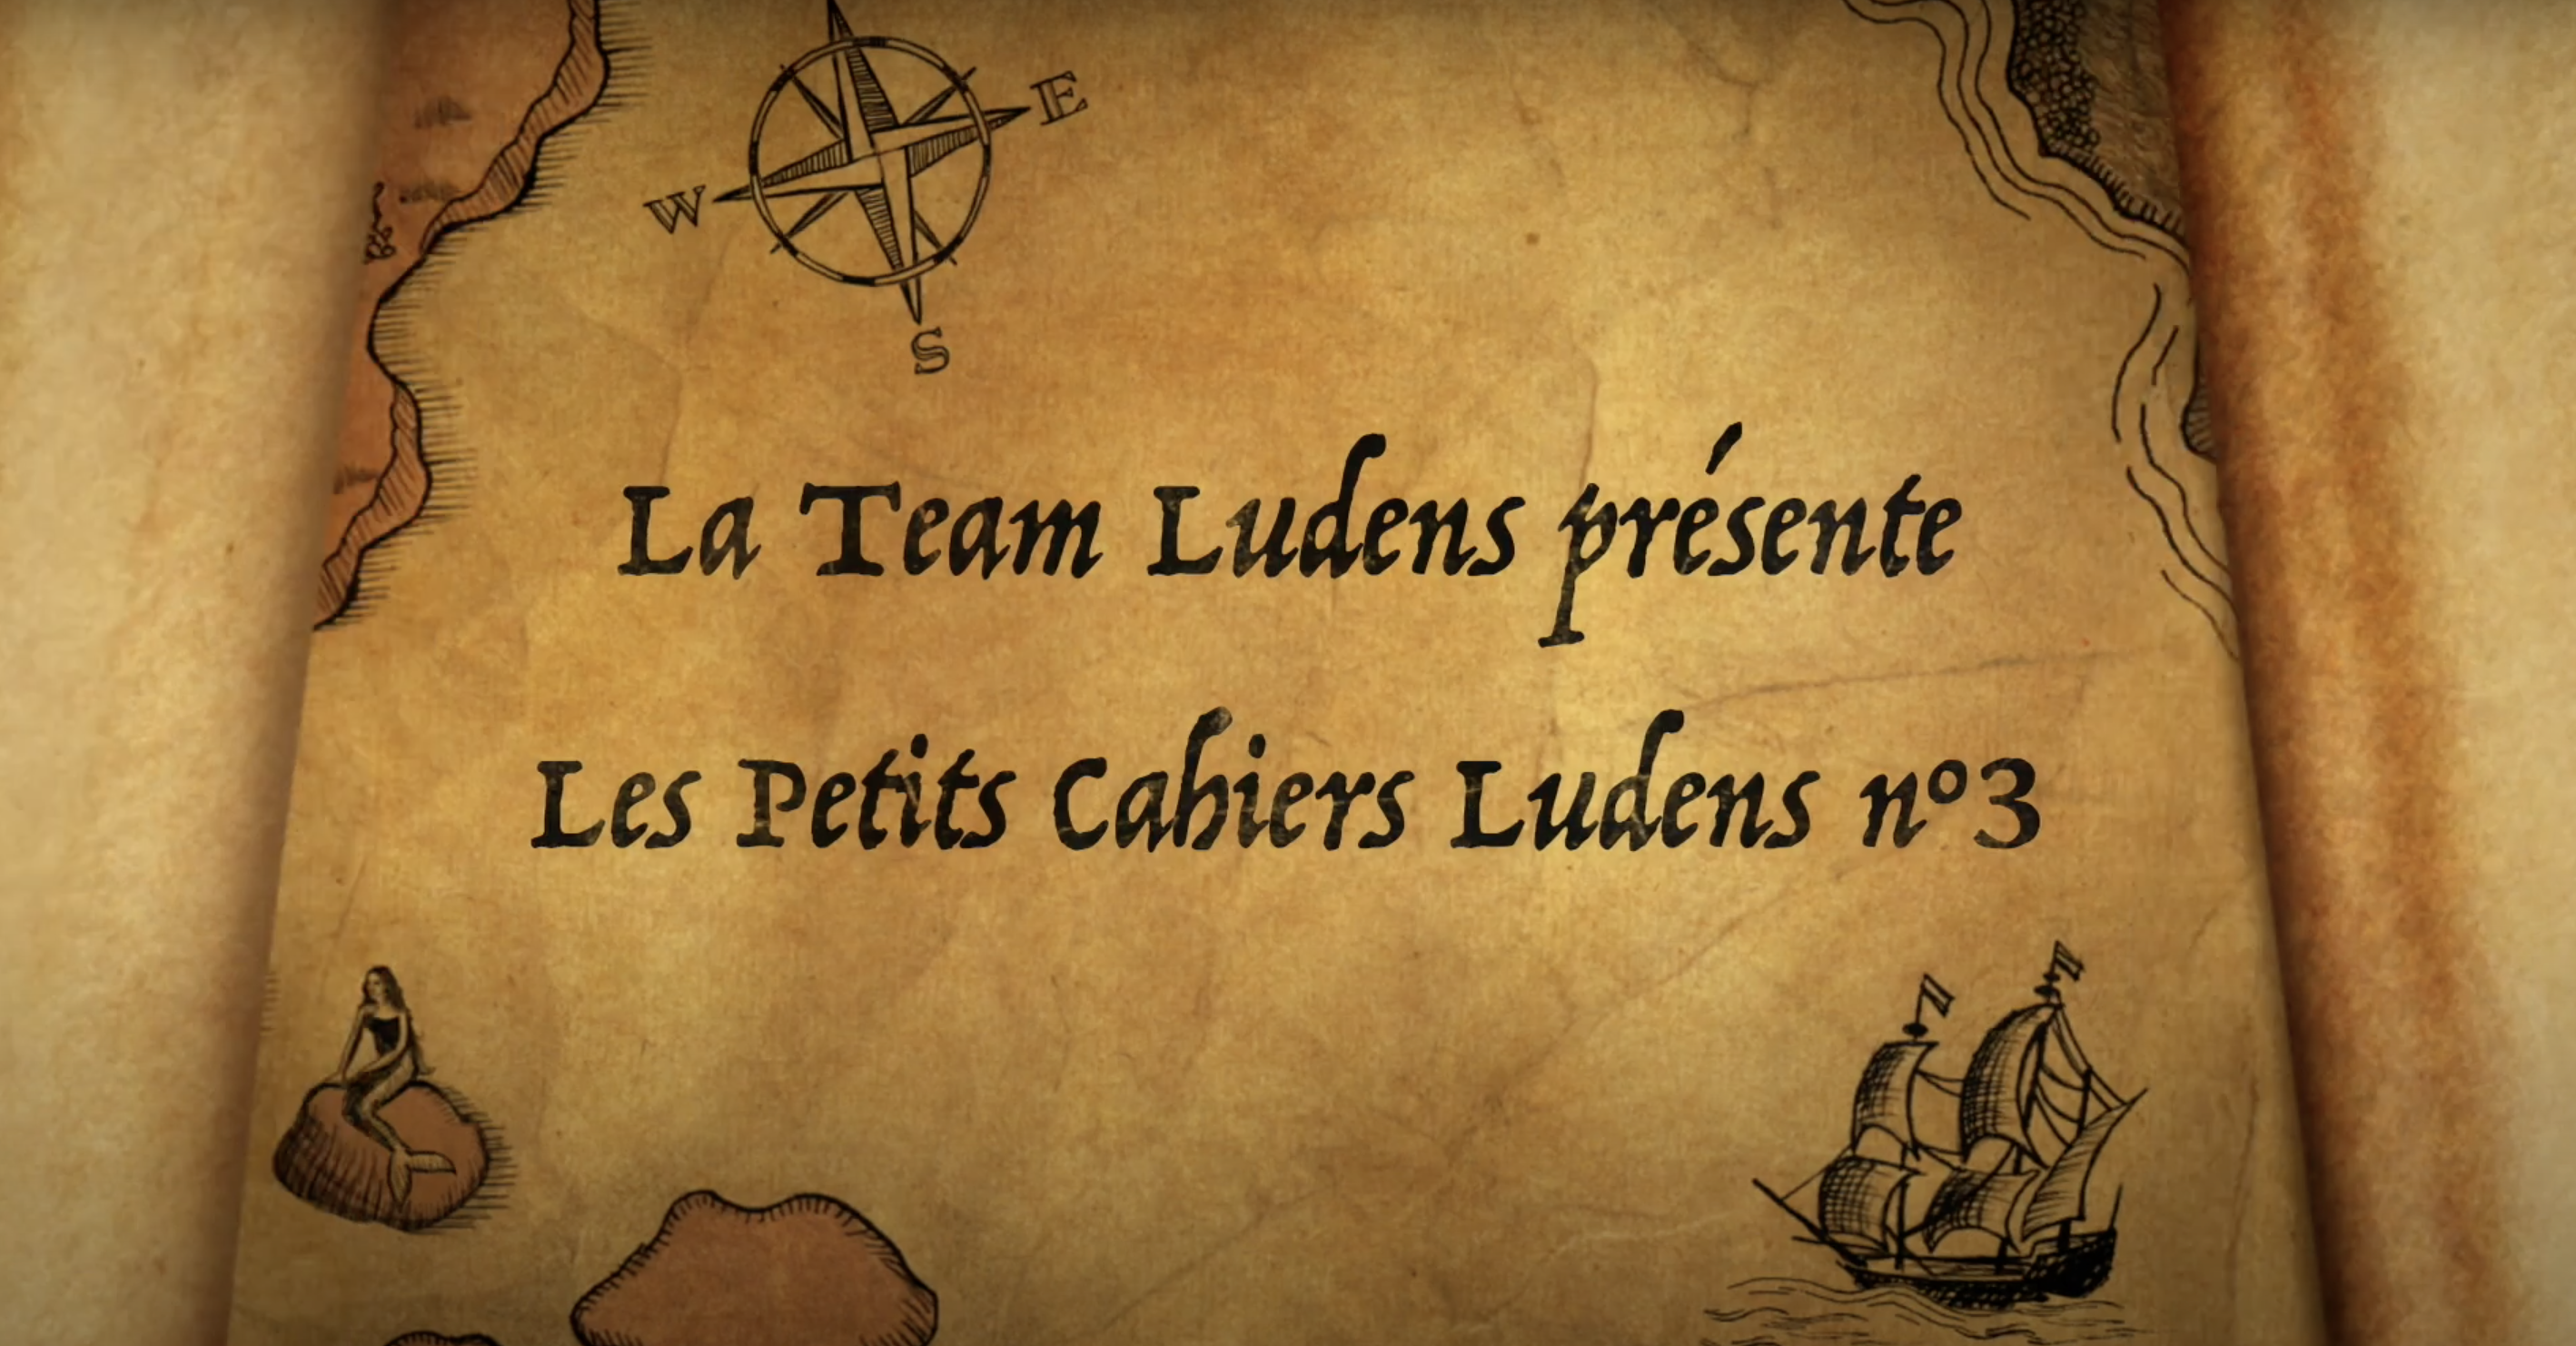 You are currently viewing Les Petits Cahiers Ludens n°3